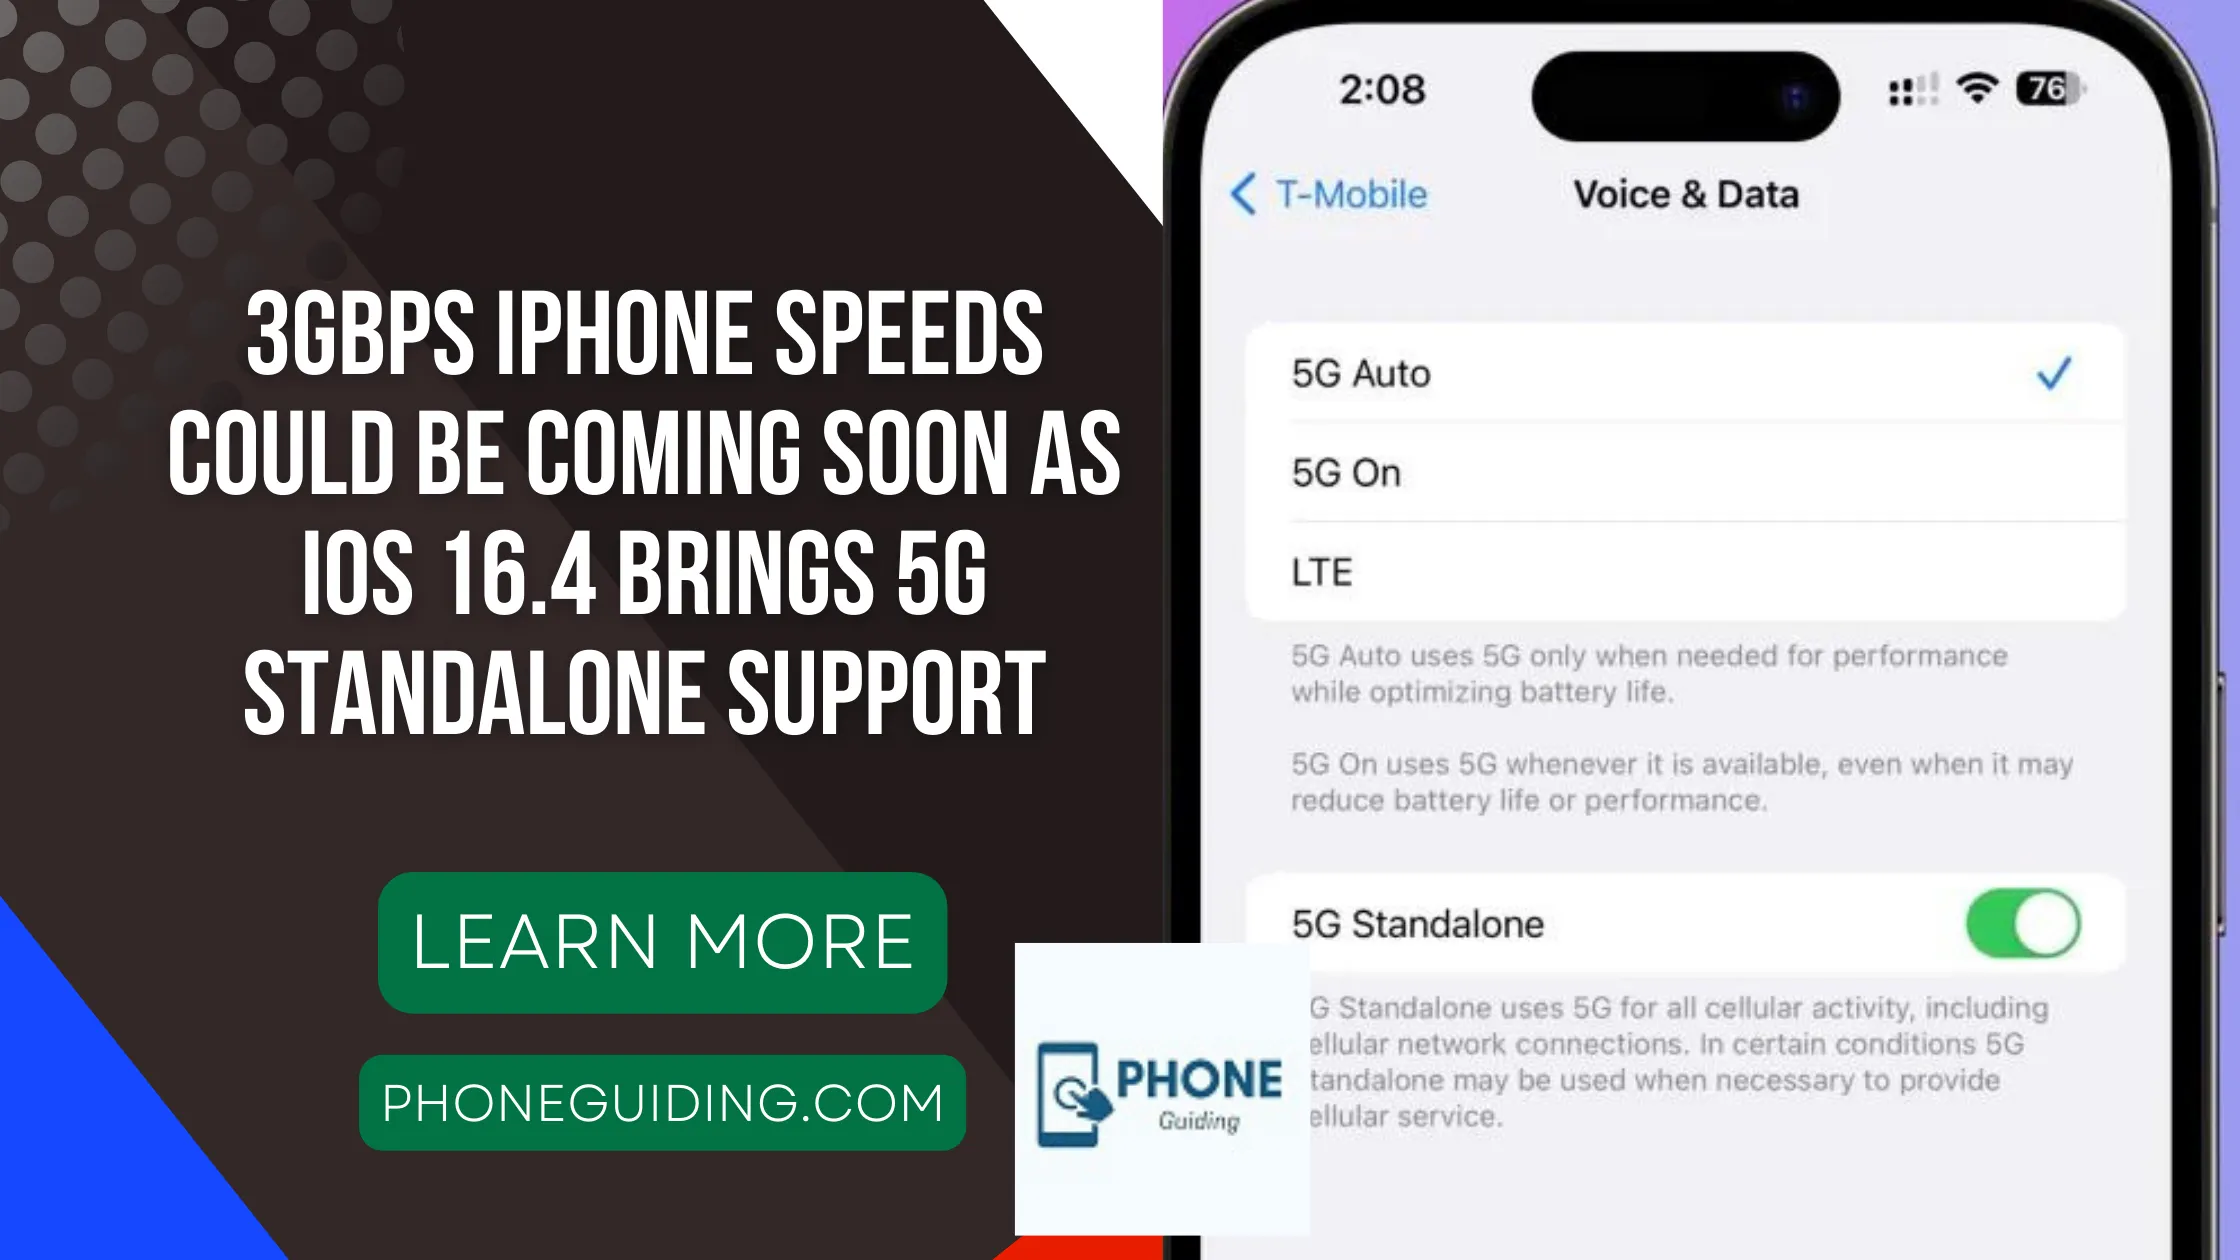 3Gbps iPhone Speeds Could Be Coming Soon as IOS 16.4 Brings 5G Standalone Support